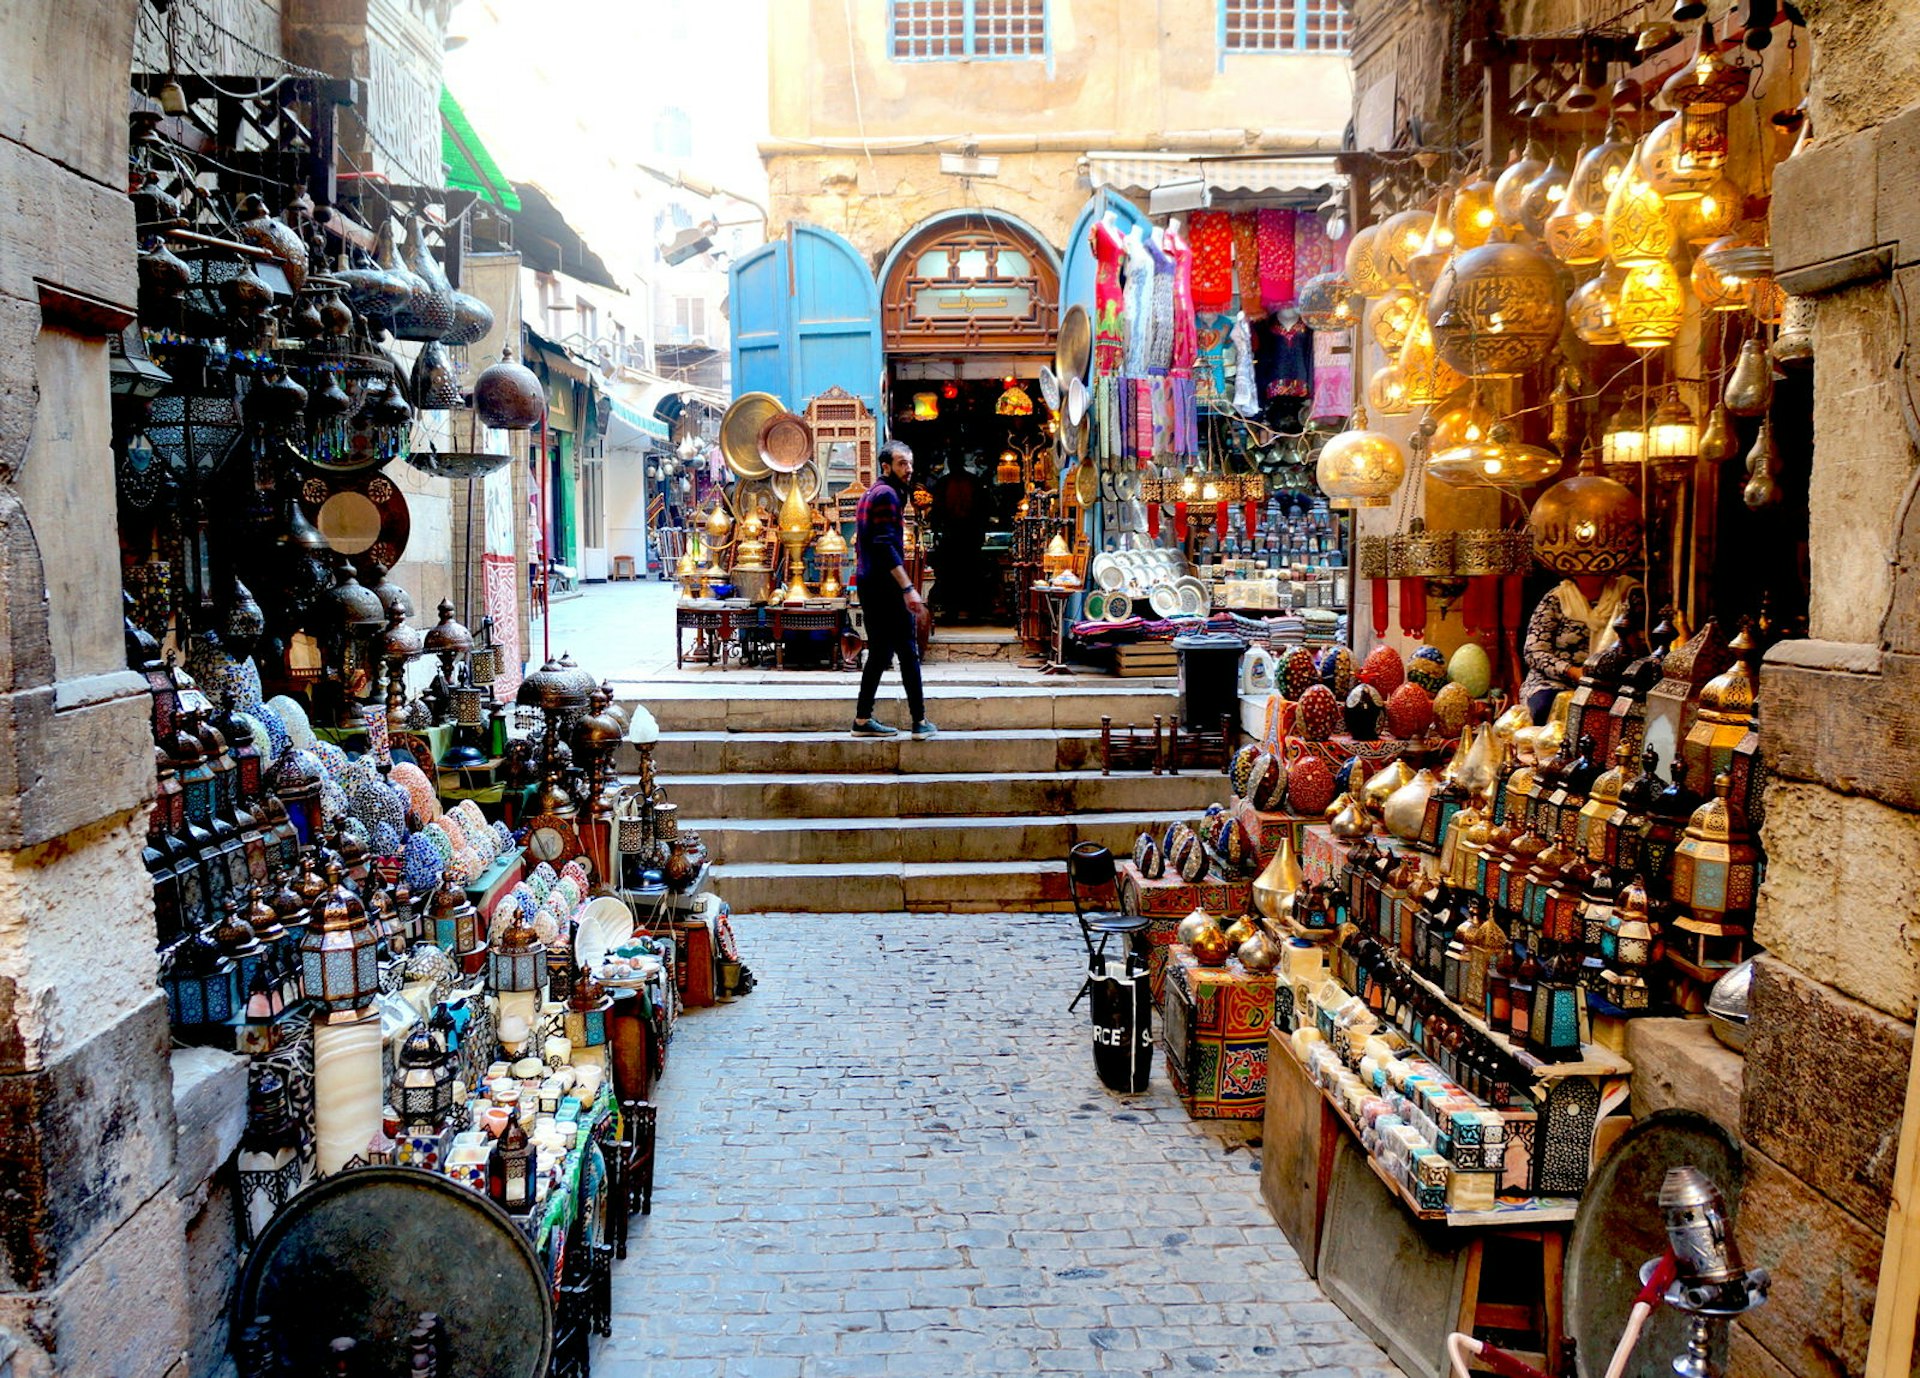 Shop selling lamps in Khan Al Khalili, Cairo, Egypt. Image by Karima Hassan Ragab / Lonely Planet